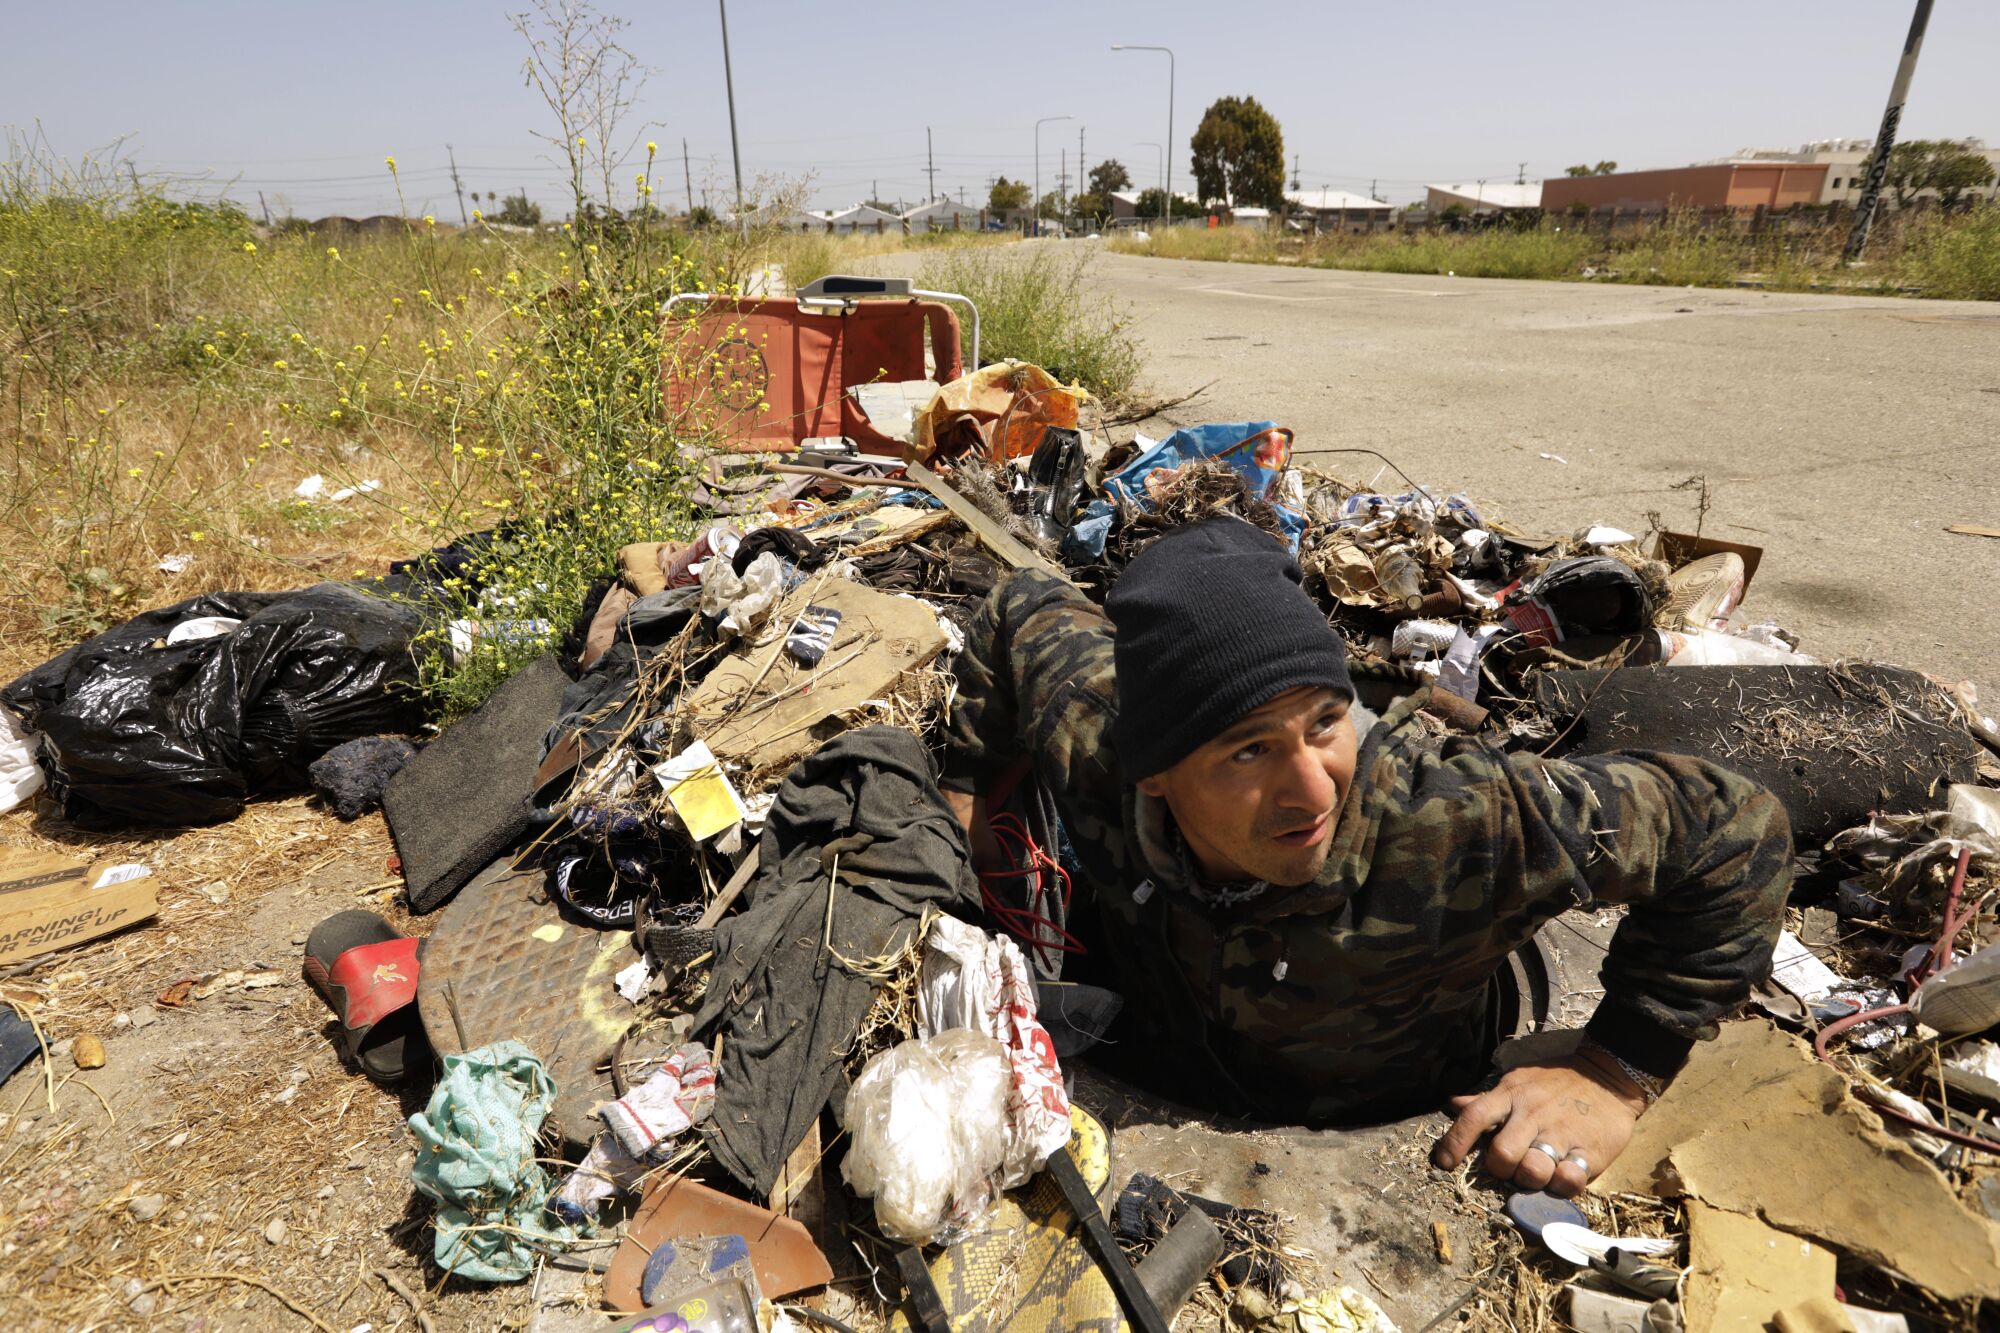 Juan Luis Gonzalez-Castillo climbs out of a storm drain where he lived in a vacant field in Watts. 